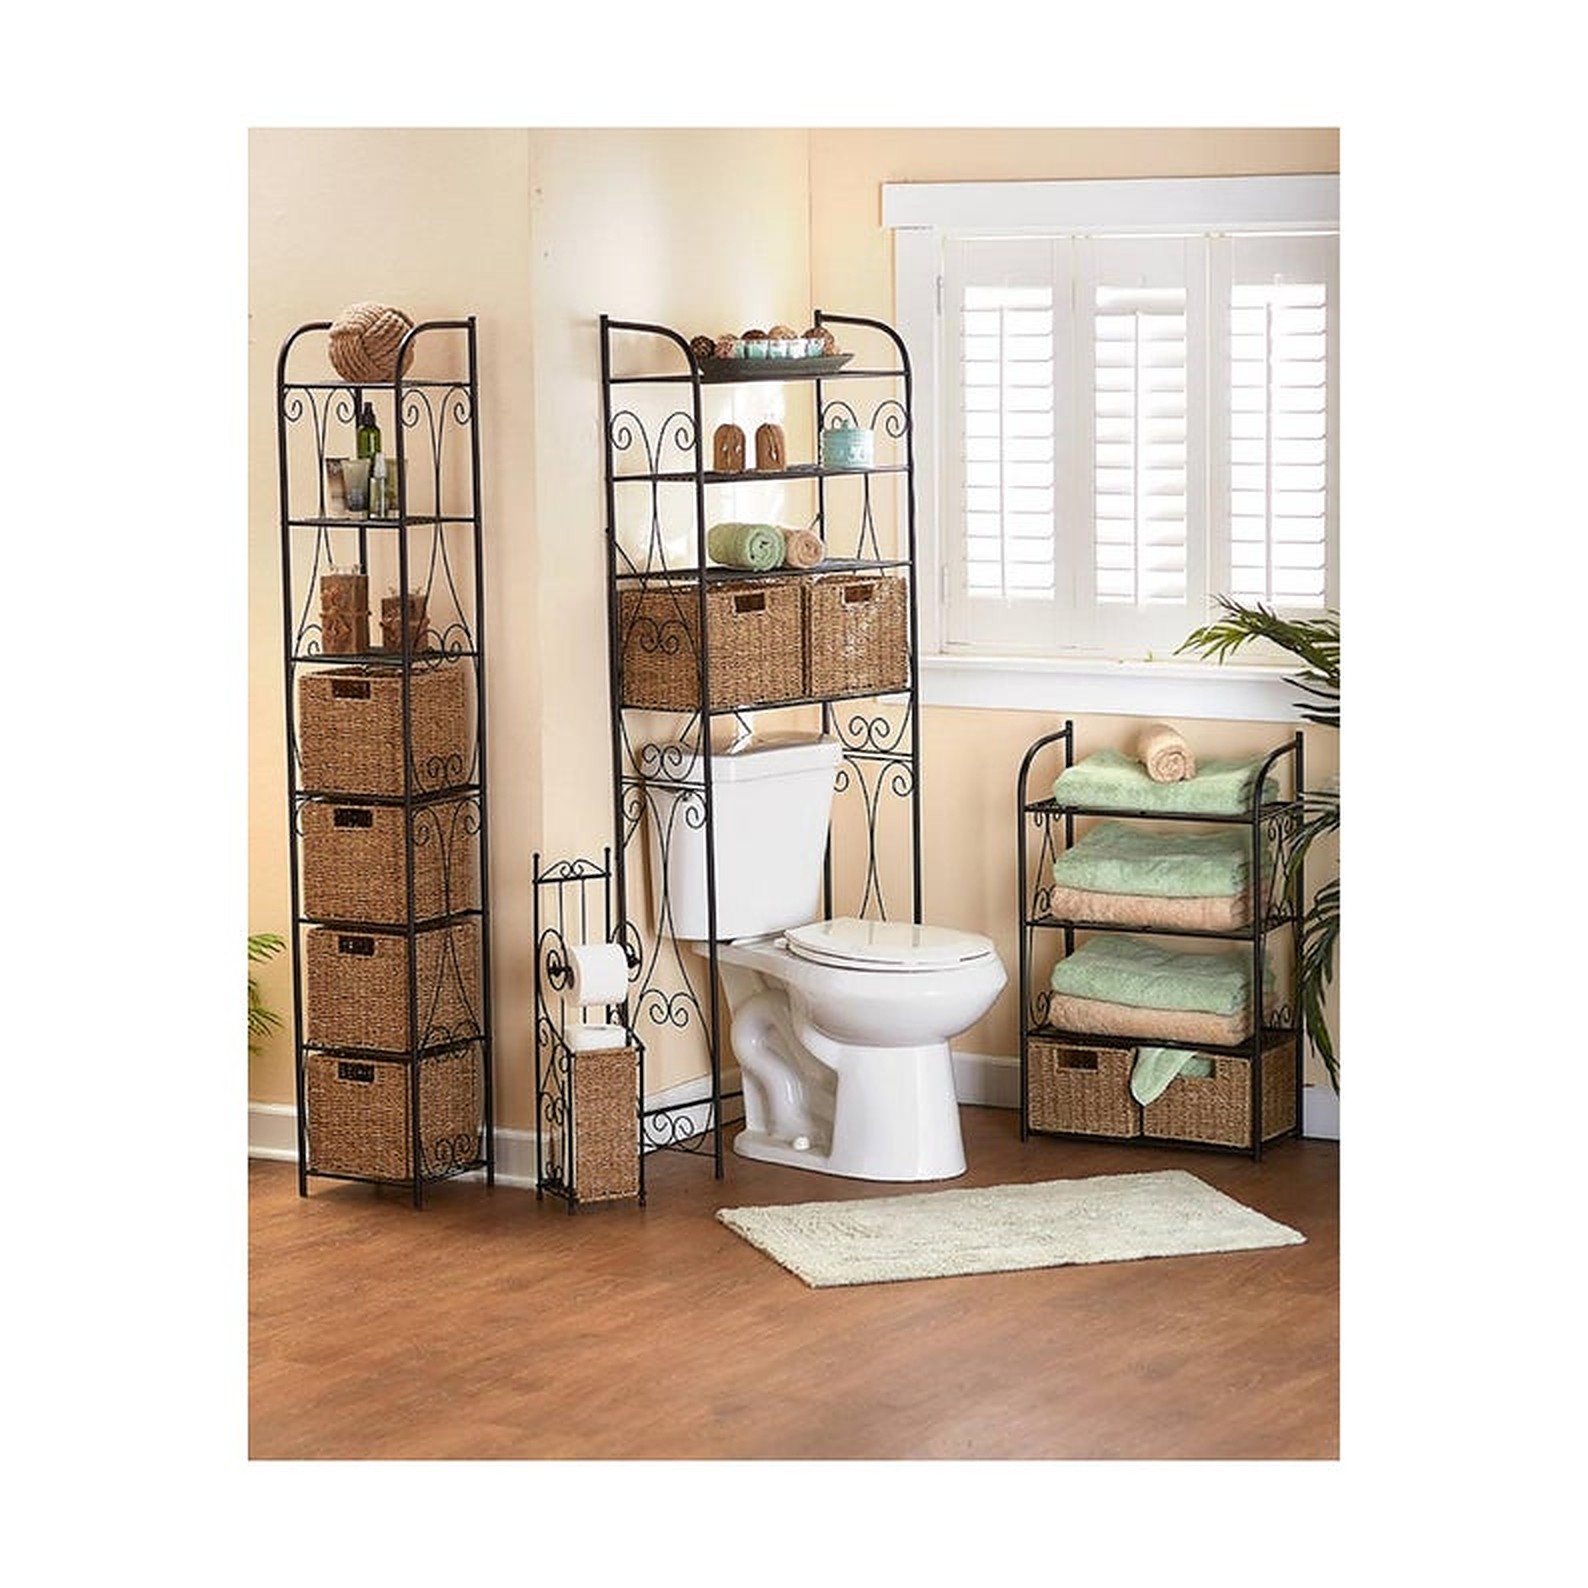 Smart Over The Toilet Storage Solutions, Wicker Bathroom Space Saver Over Toilet